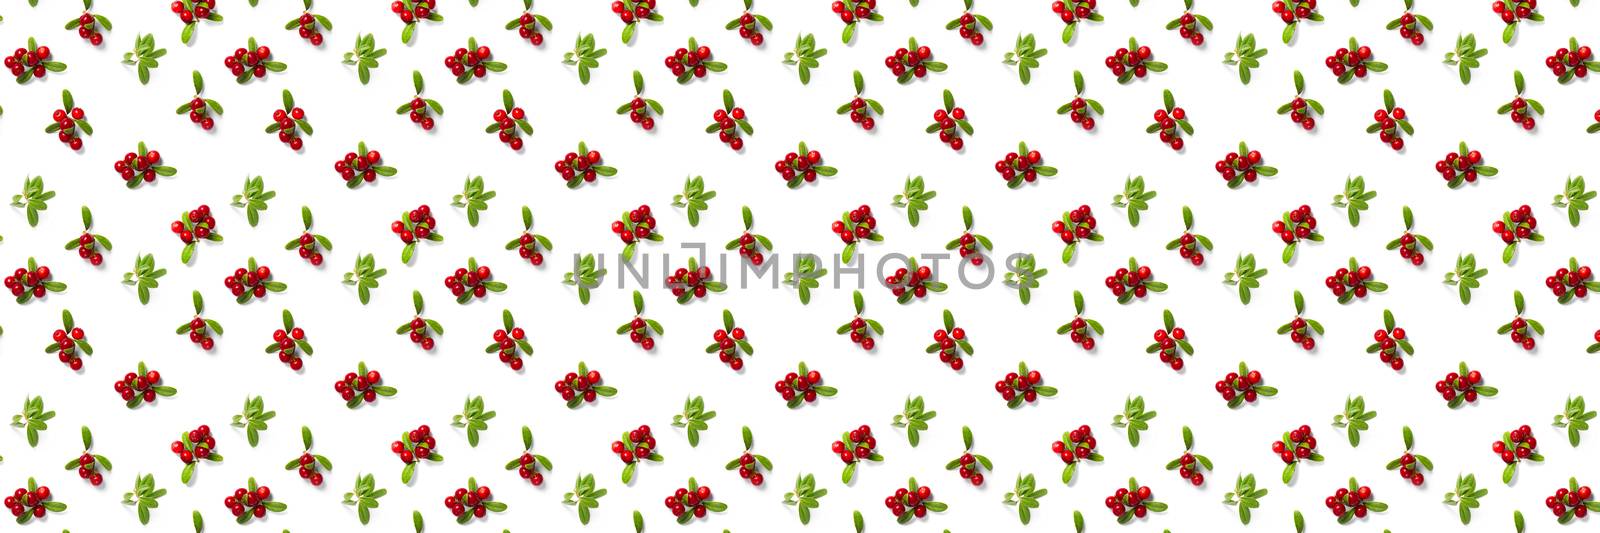 Lingonberry background on white backdrop. Fresh cowberries or cranberries with leaves as background by PhotoTime